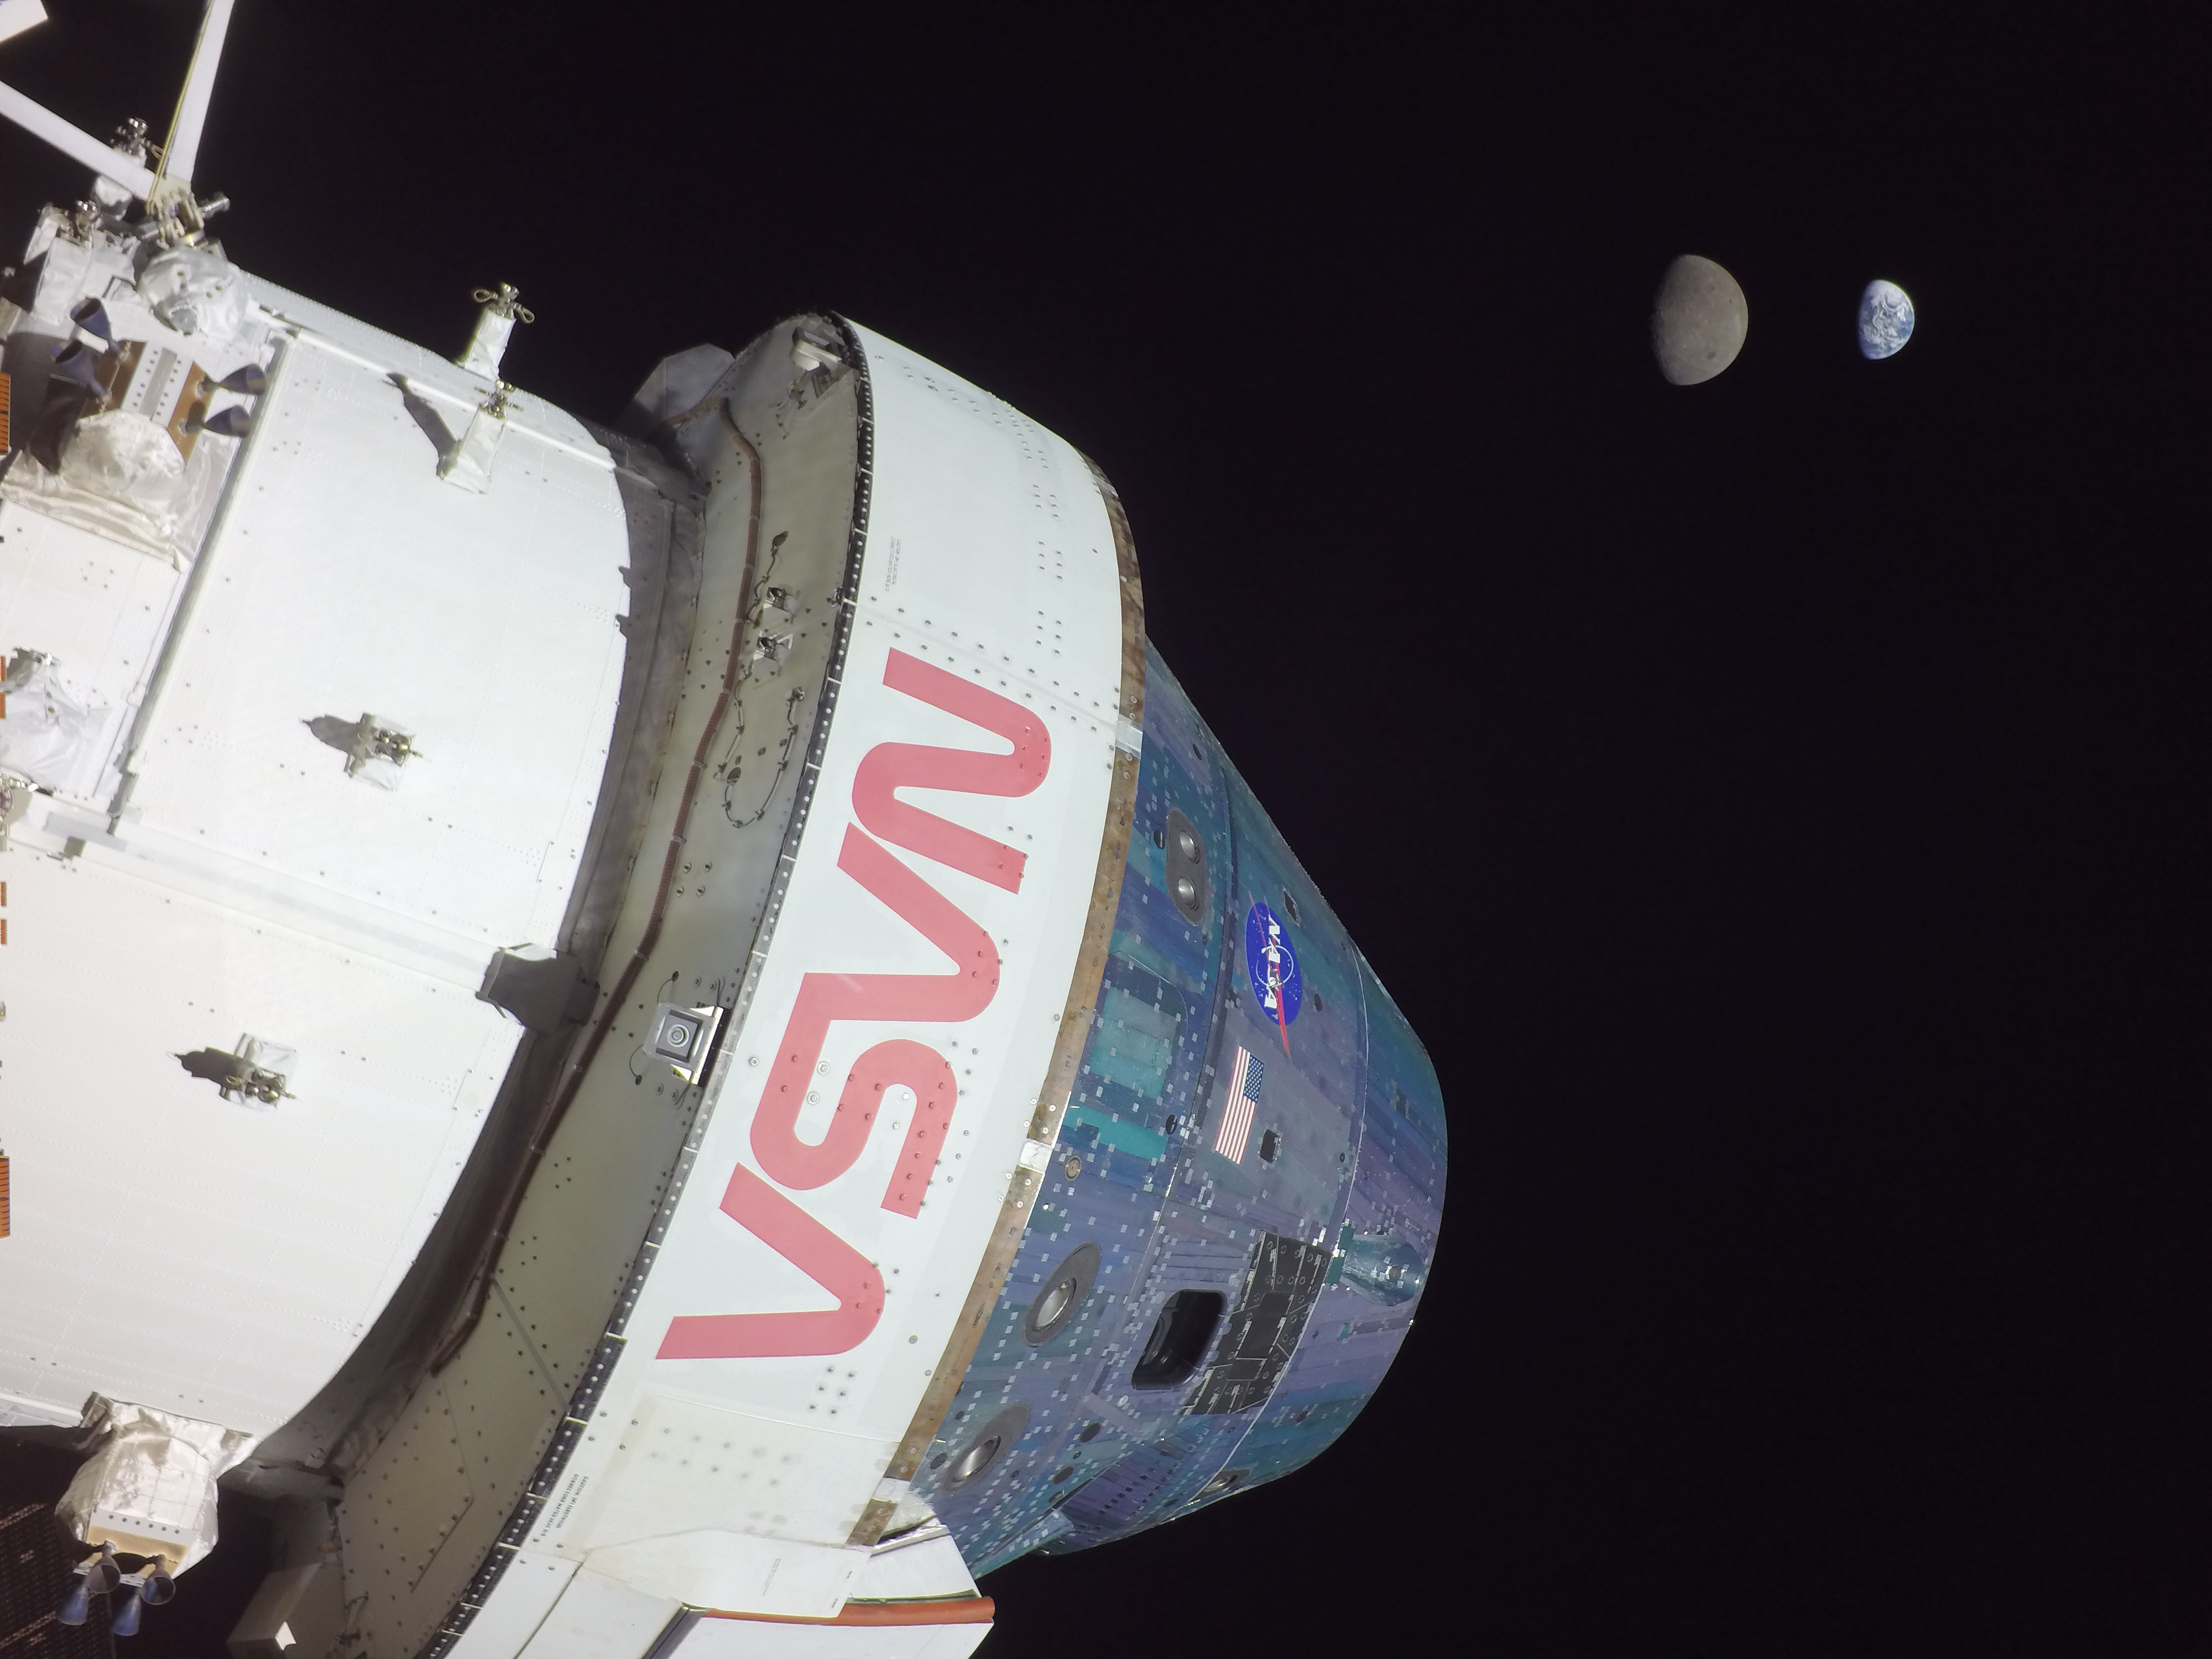 The Orion capsule with the Earth and the Moon in the background, seen from a camera mounted on one of the spacecraft's solar arrays.